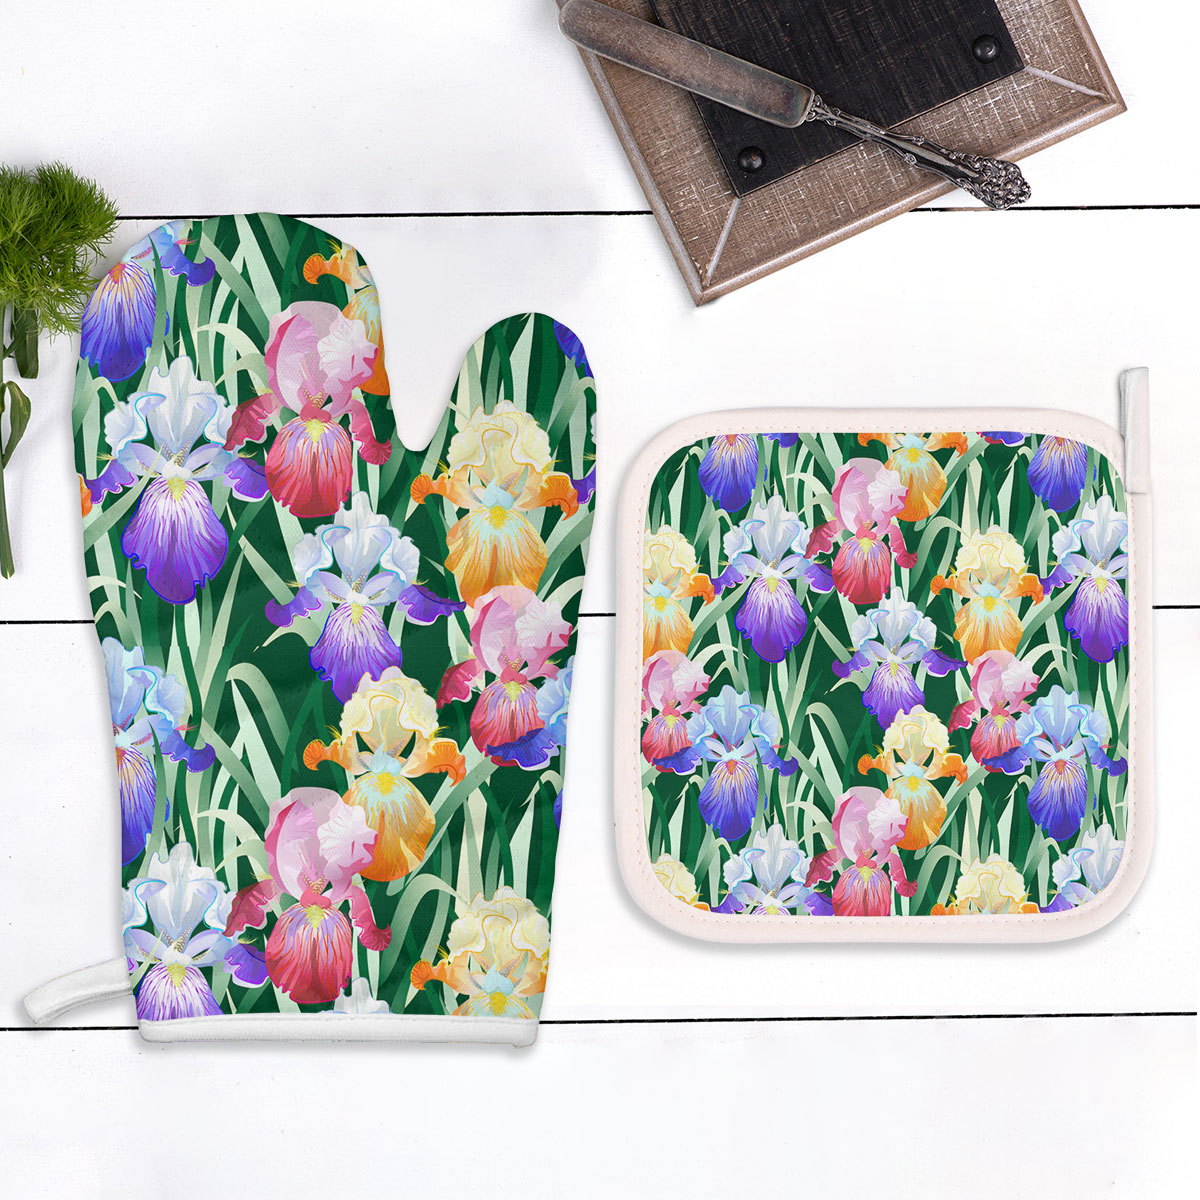 Colorful Iris Flowers And Green Leaves Oven Mitts Pot Holder Set